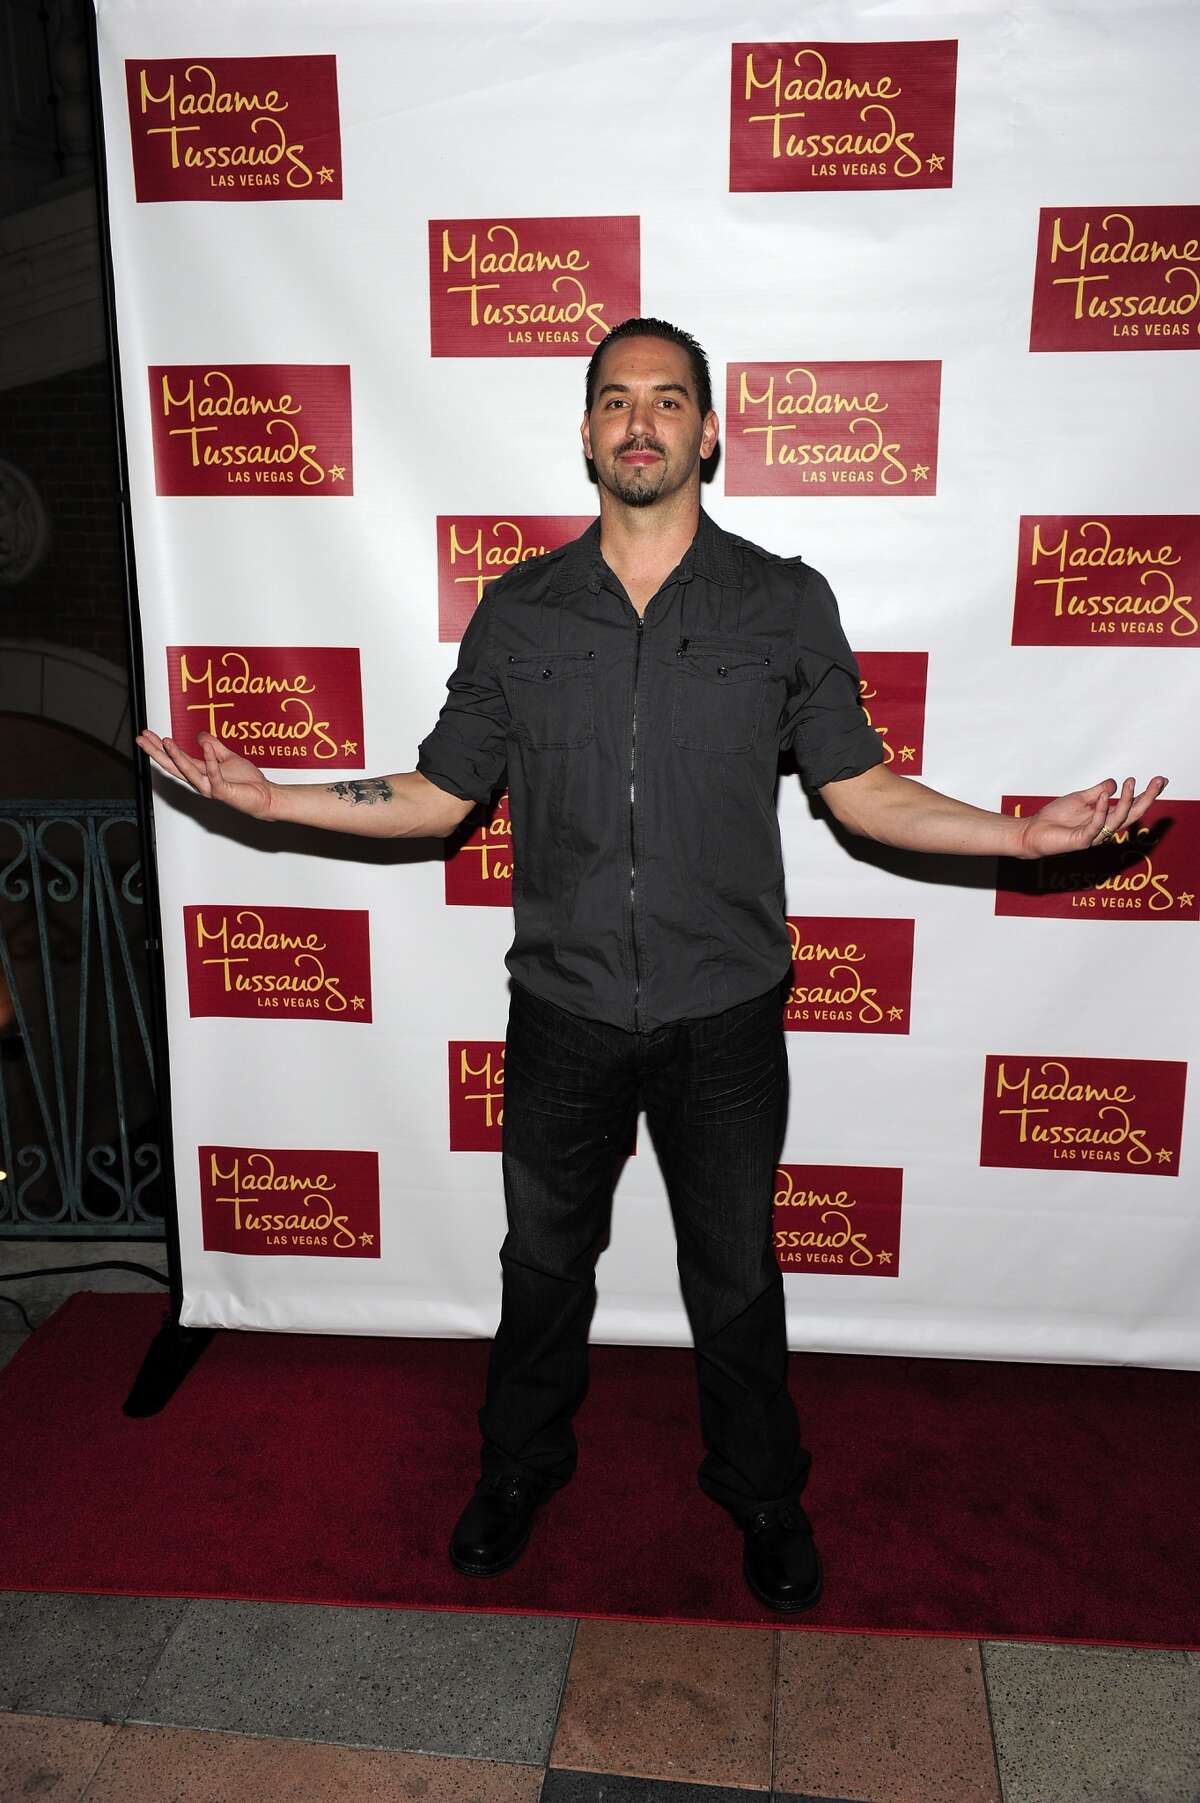 Nick Groff, who is known for starring in “Ghost Adventures," will stop by the Magnolia Hotel in Seguin to investigate paranormal activity at the hotel.